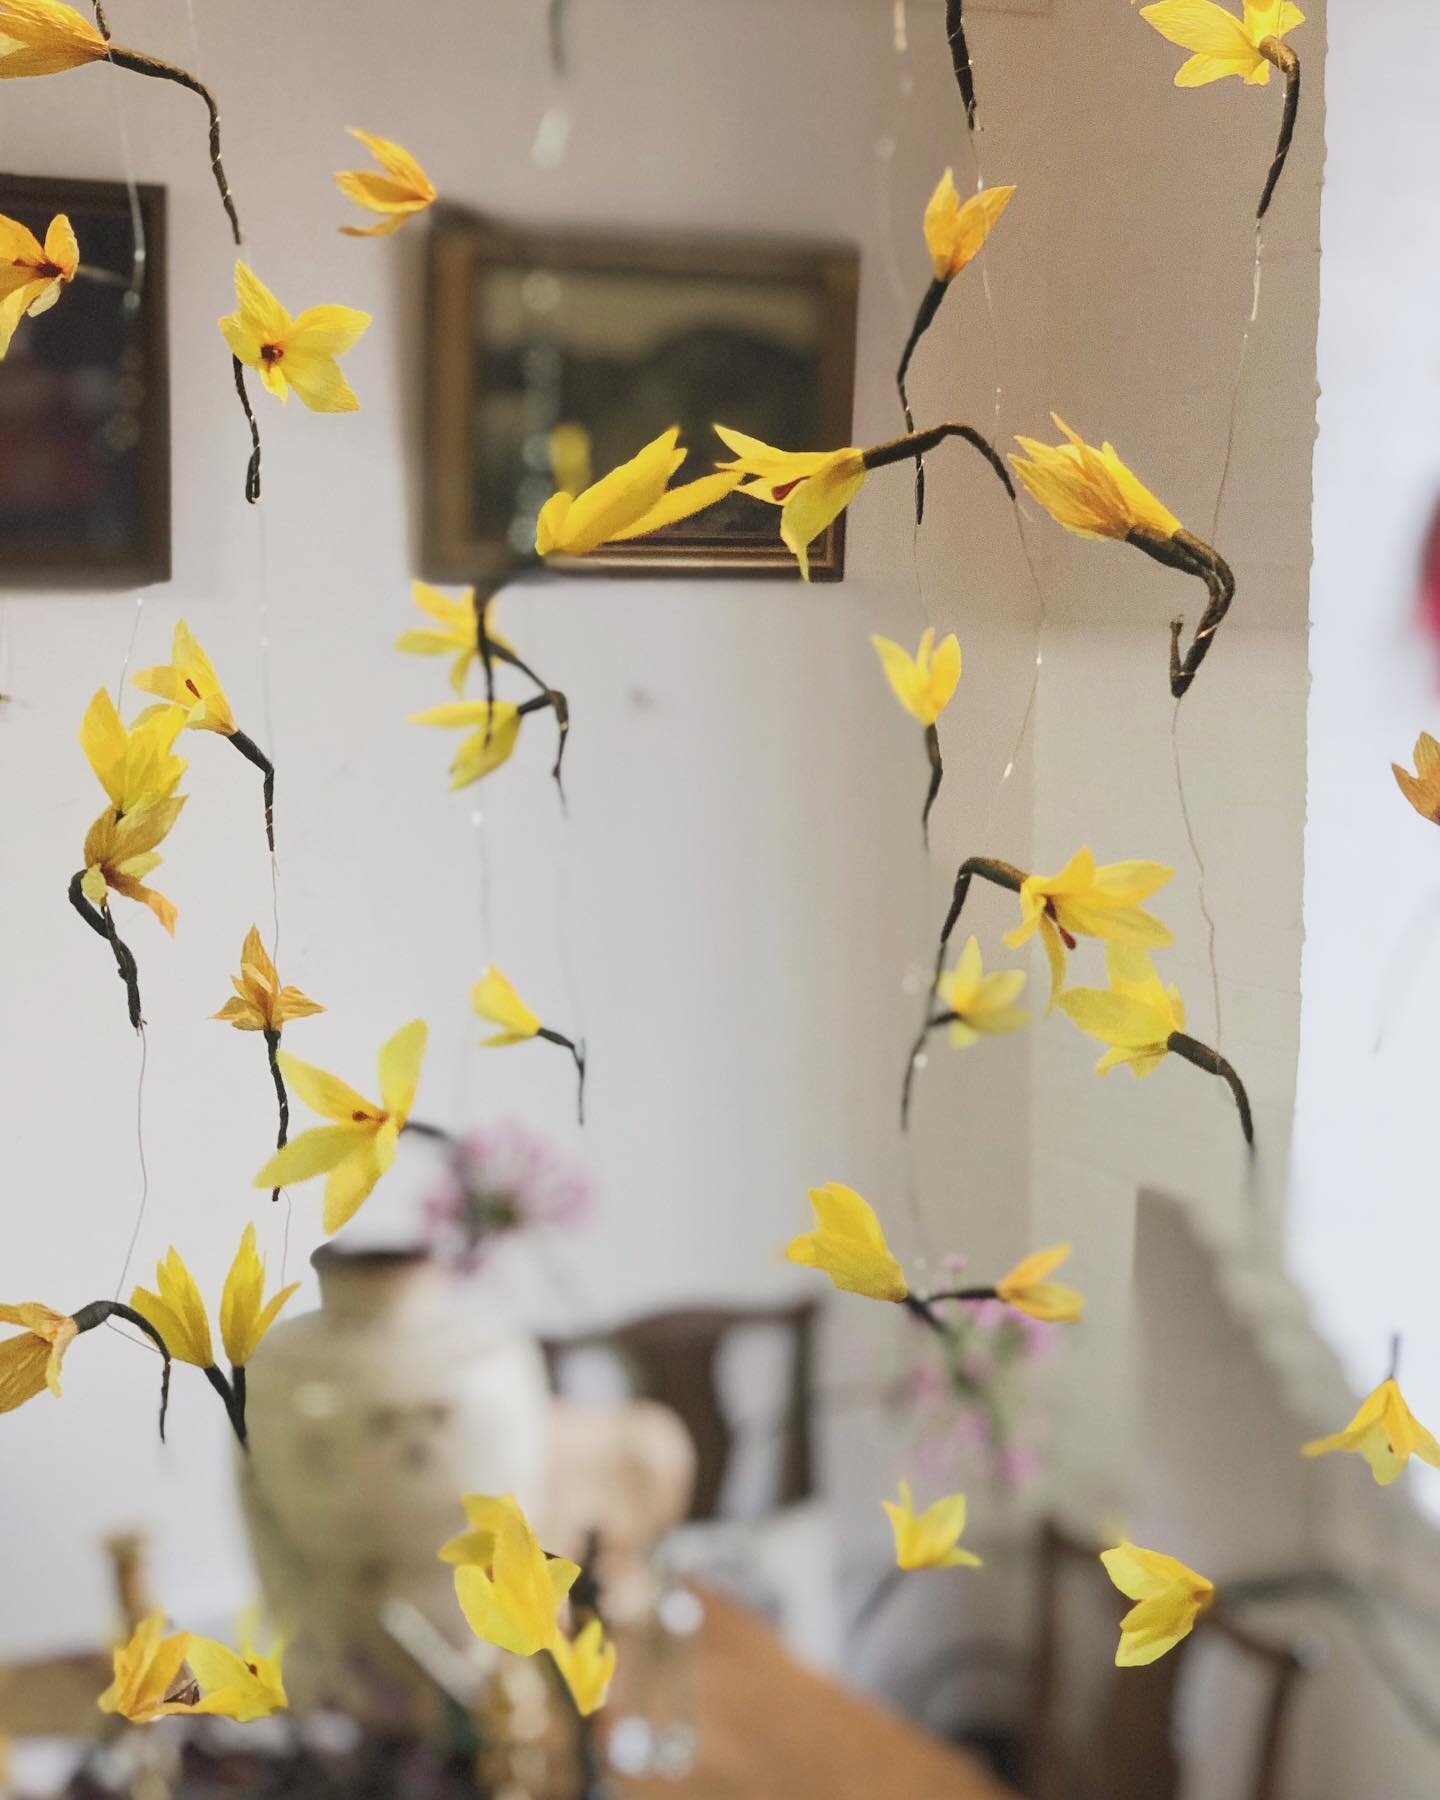 Beating the gloomy winter light in the studio with these paper forsythia garlands 💡🌼